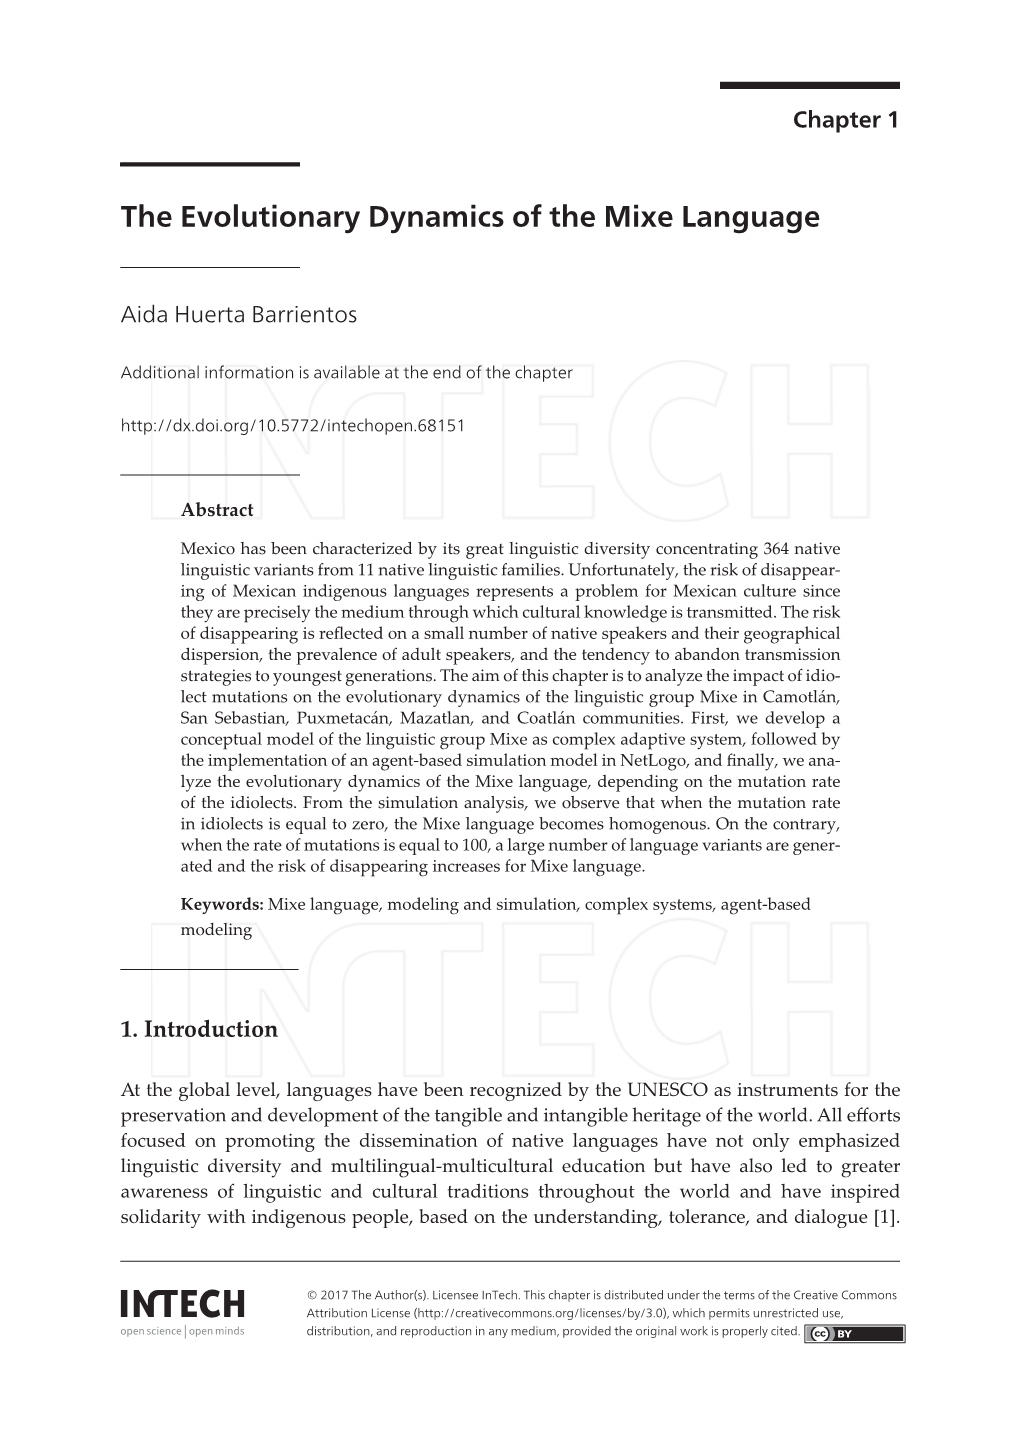 The Evolutionary Dynamics of the Mixe Language